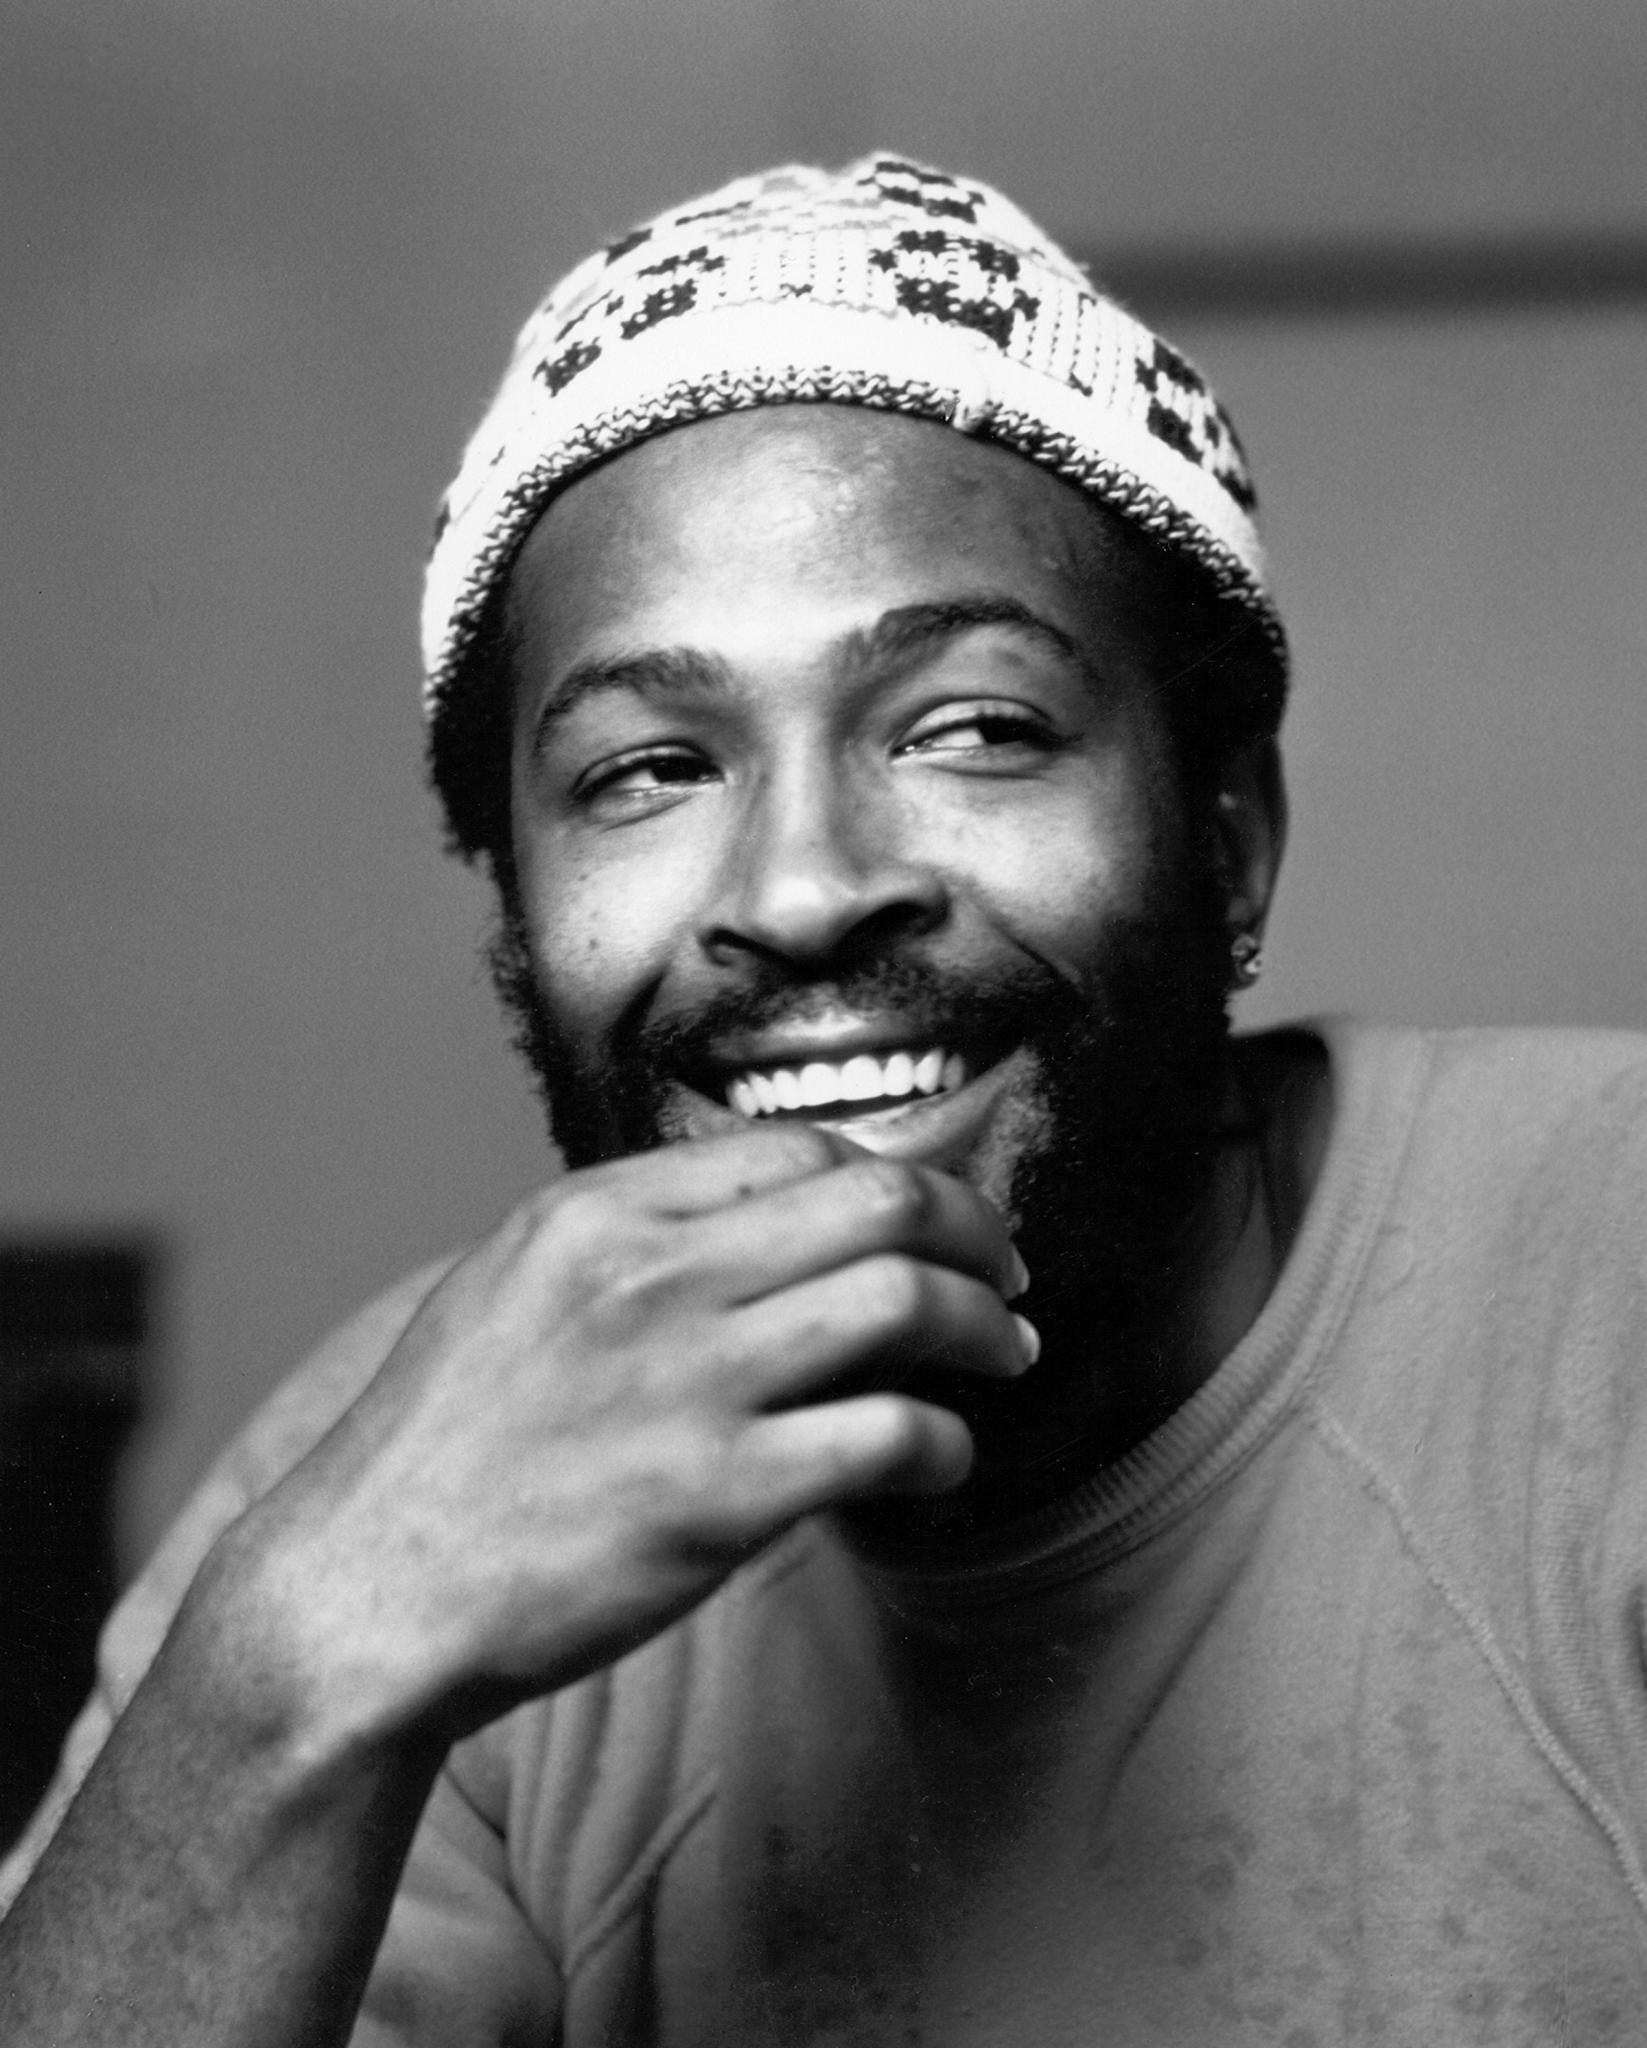 Marvin Gaye's Ex-Wife Upset About New Biopic and Play